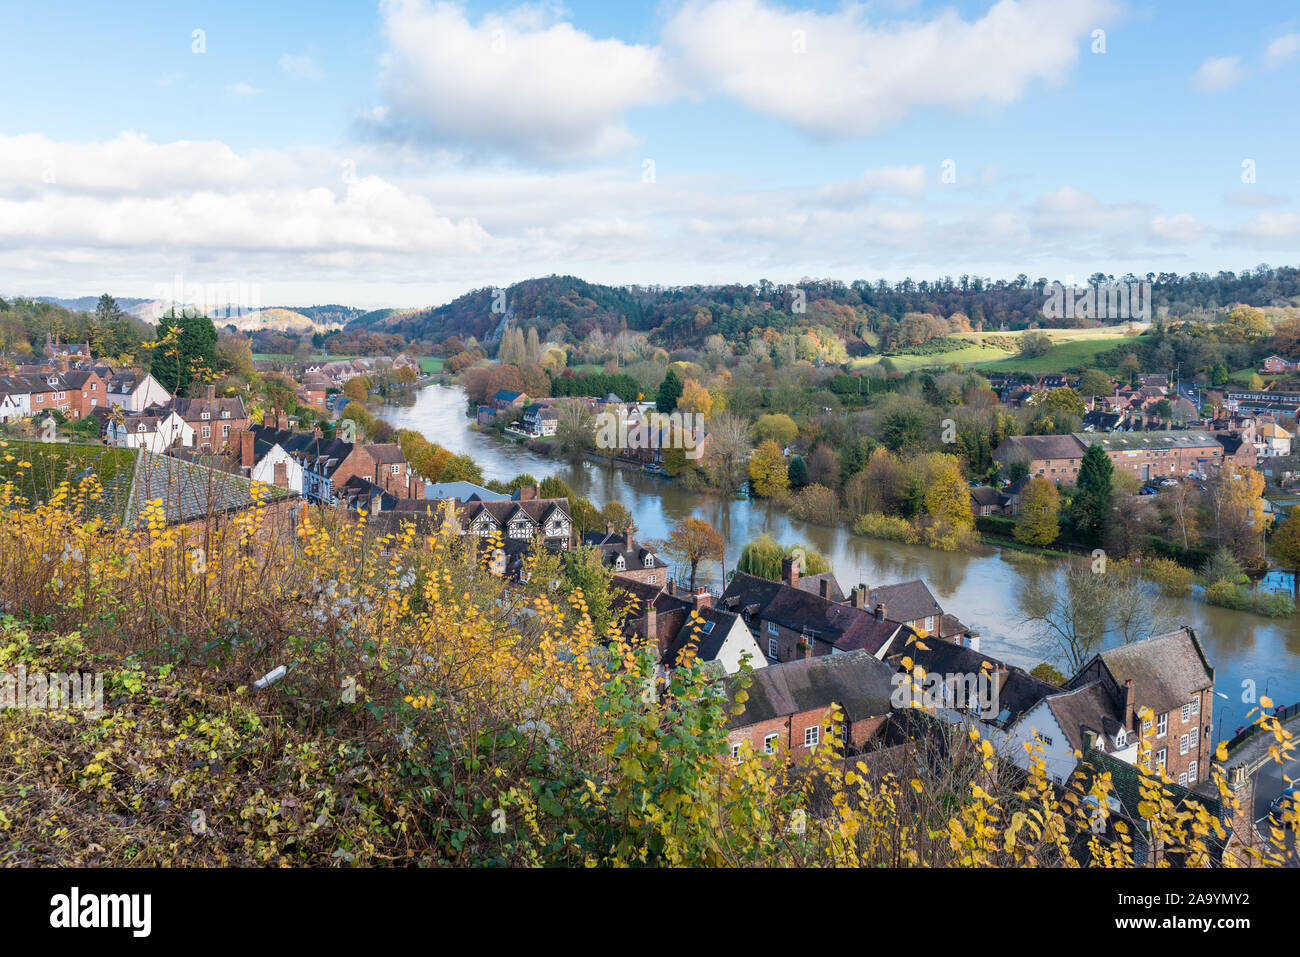 View of the River Severn running through Bridgnorth, Shropshire from the High Town Stock Photo